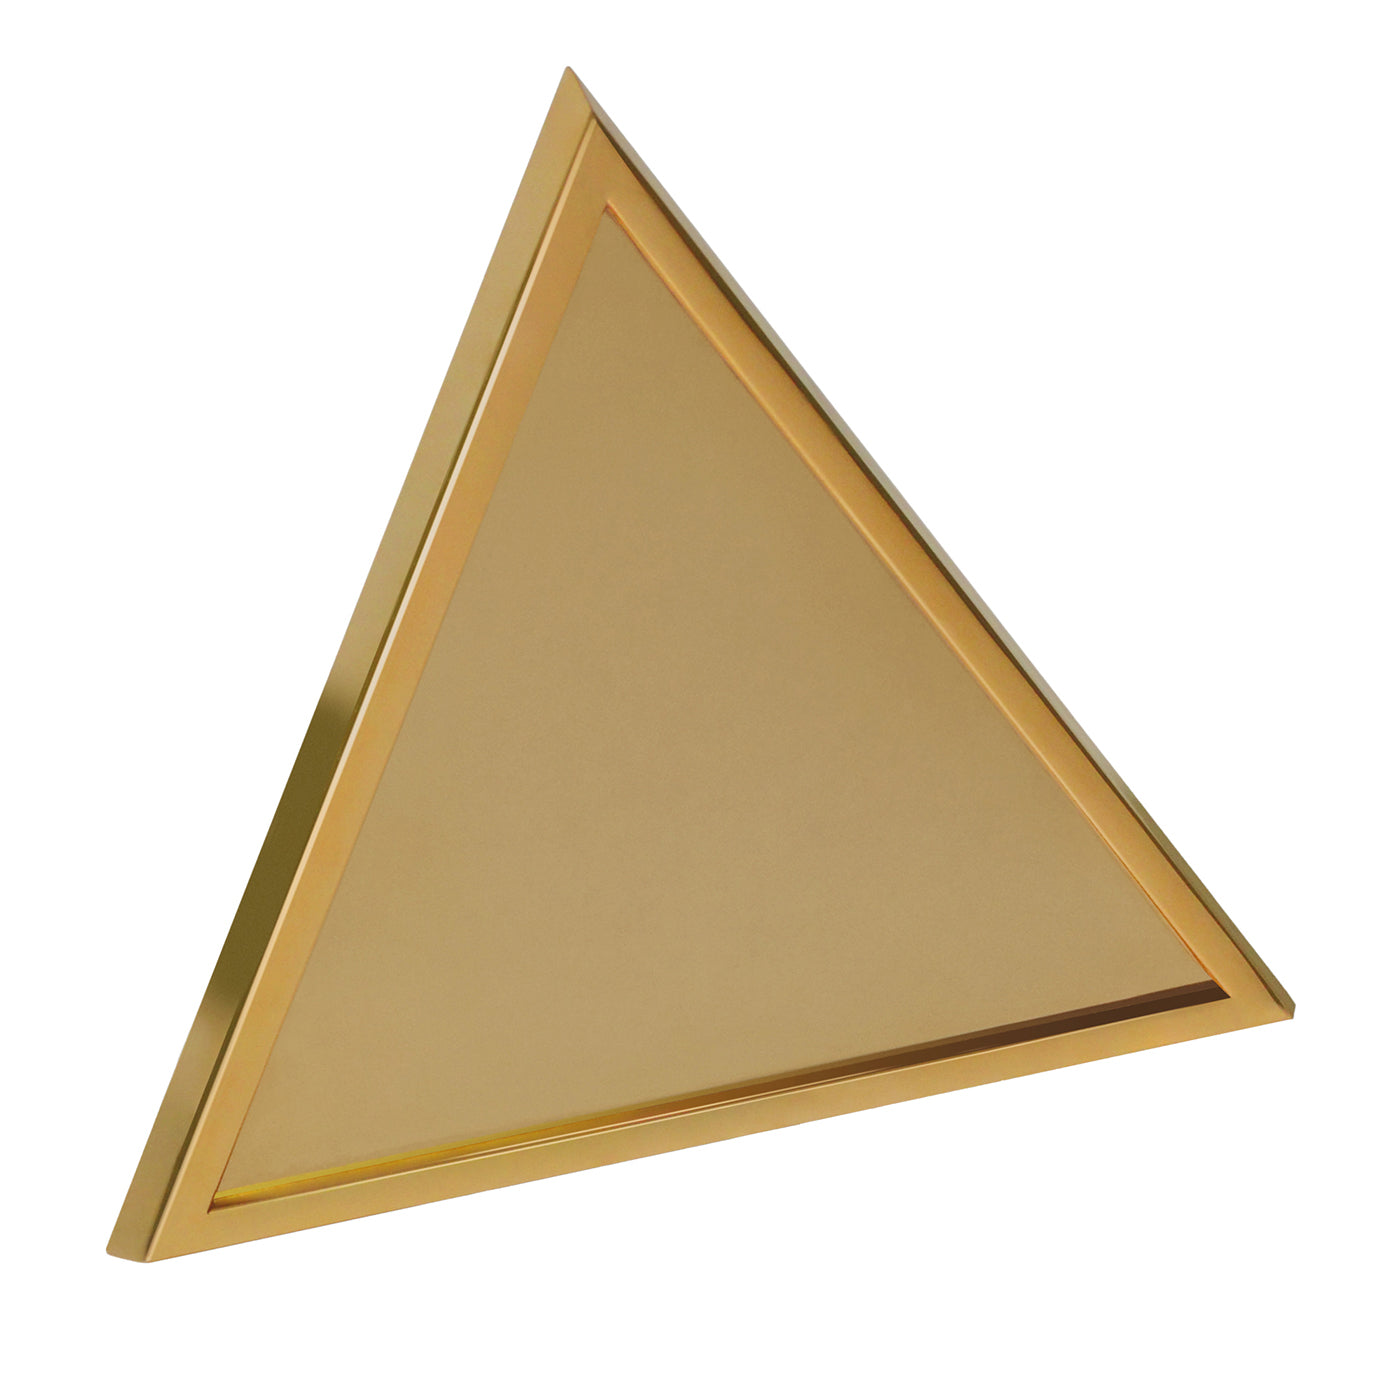 Yoni Numbered Edition Gold Tray - Alternative view 1